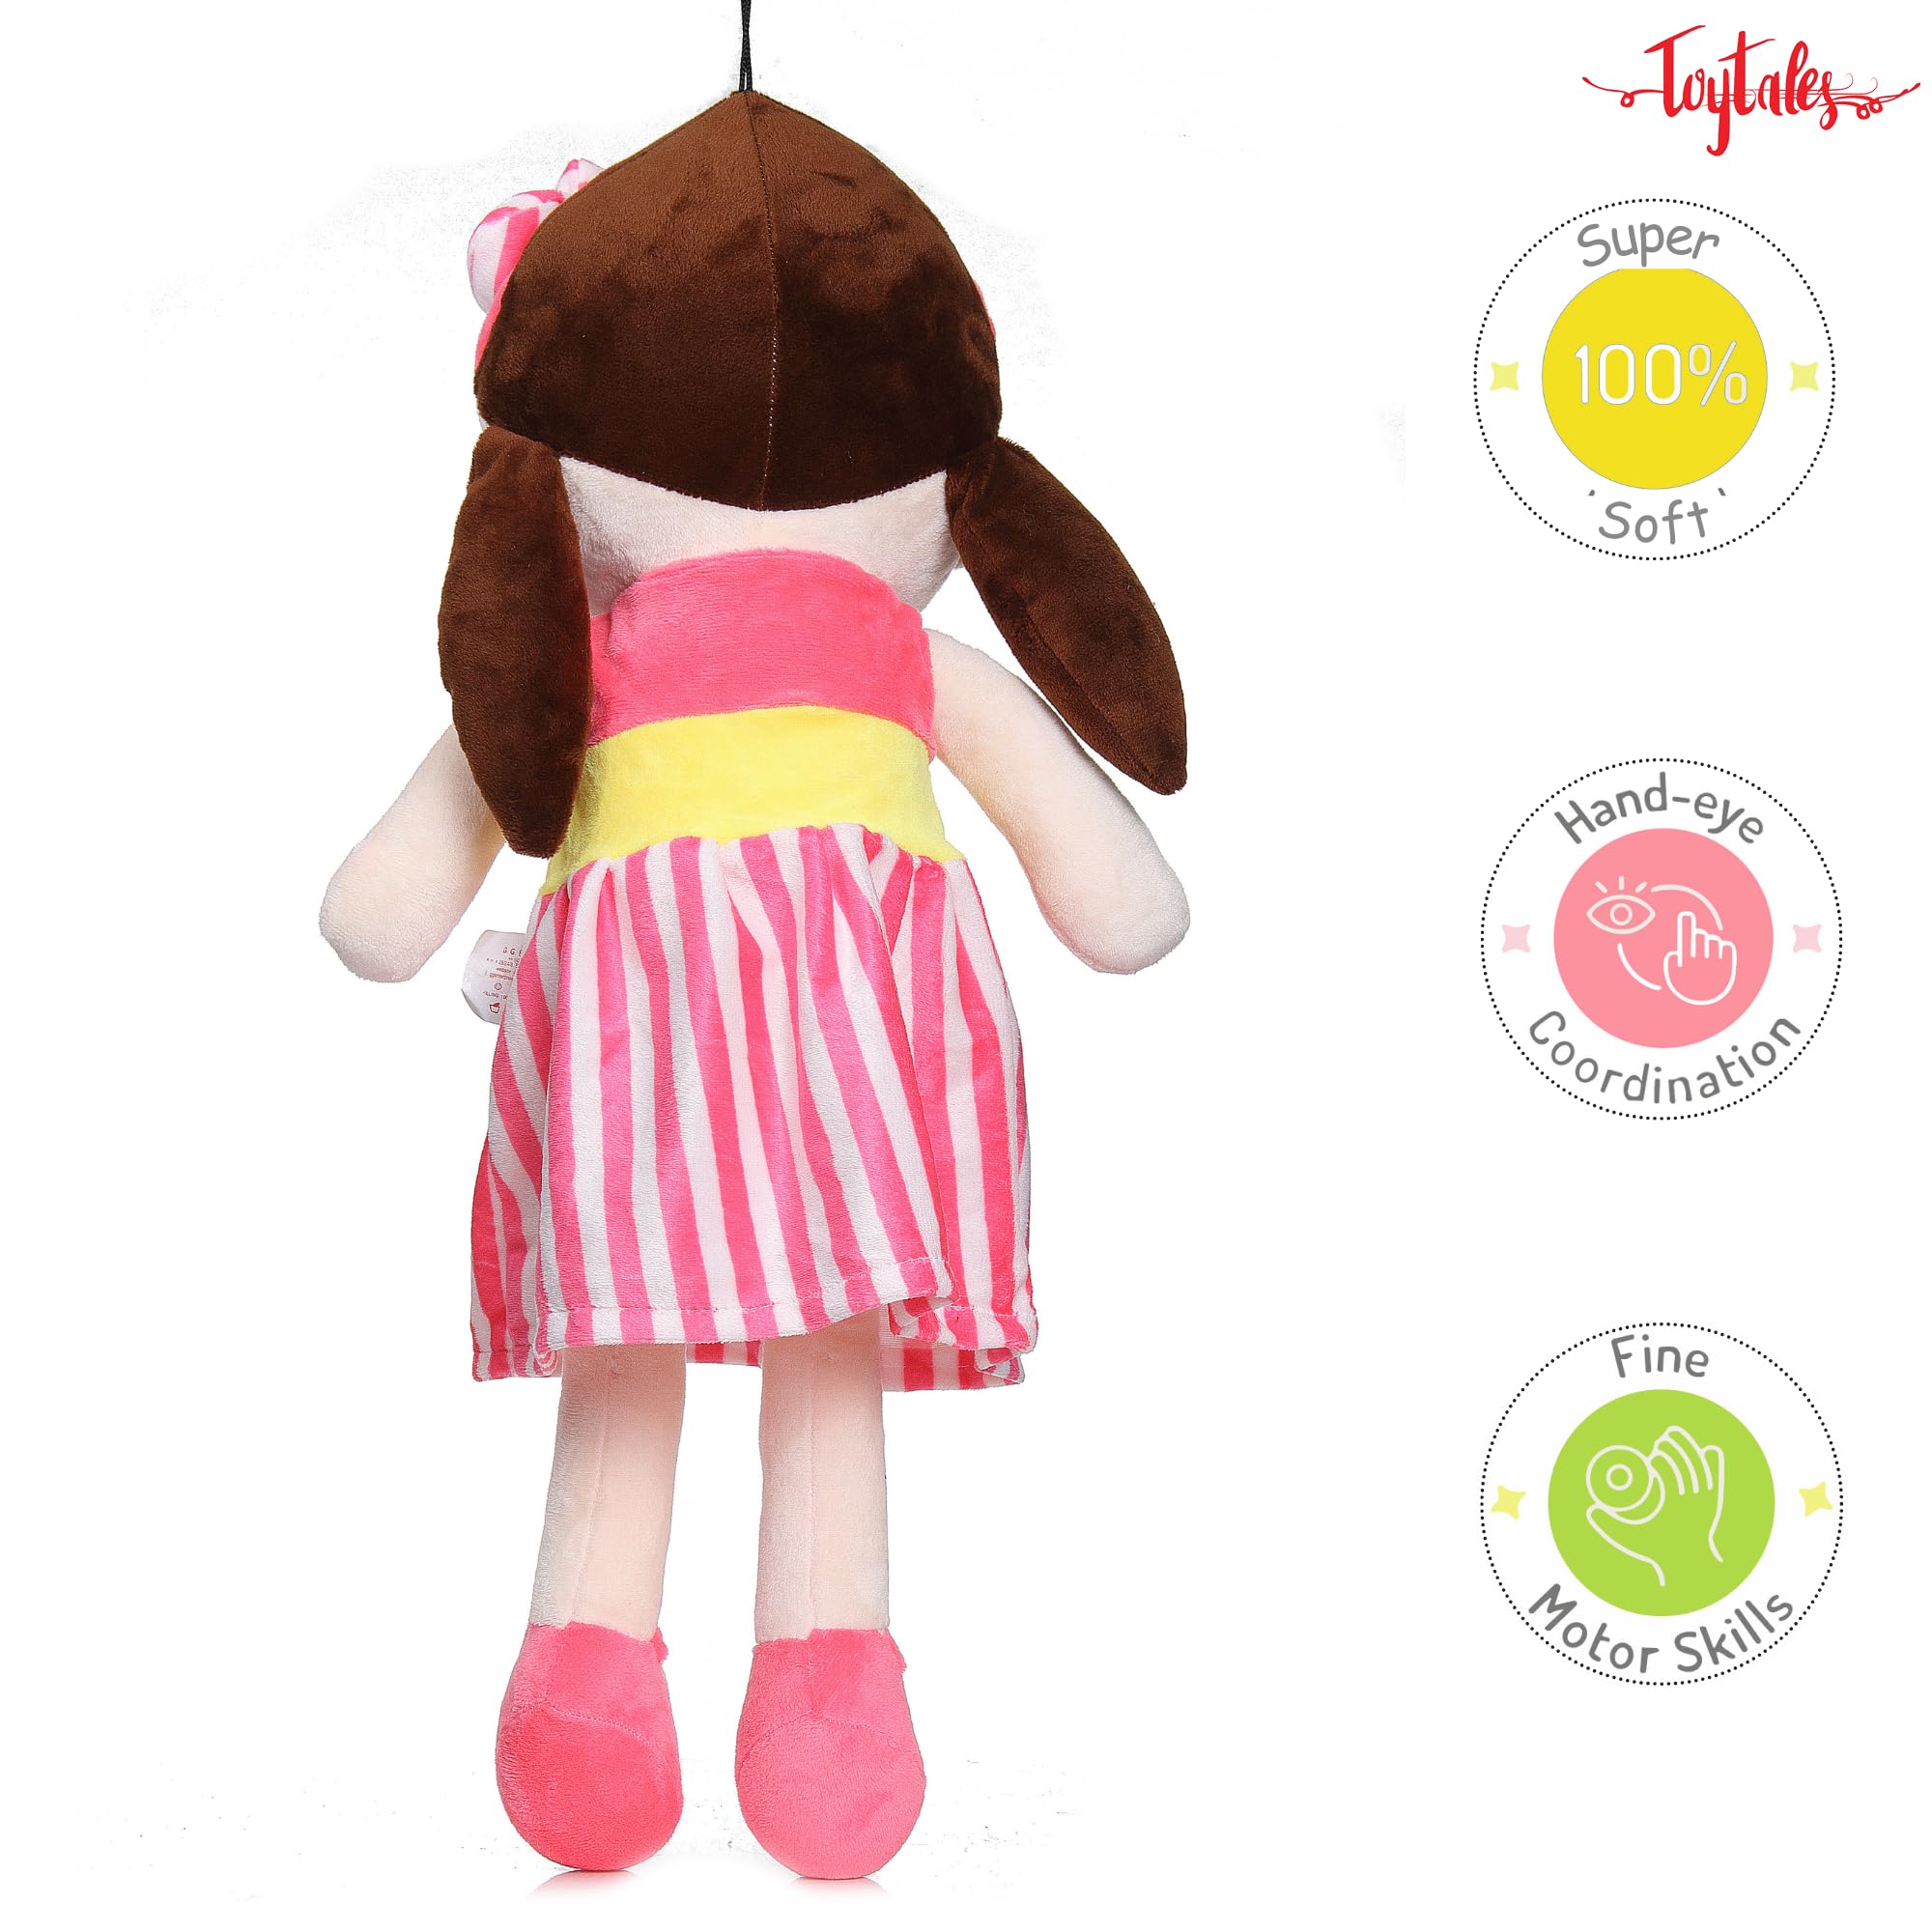 Cute Super Soft Stuffed Doll Small 40cm, Cuddly Squishy Dolls, Plush Toy for Baby Girls, Spark Imaginative Play, Safe & Fun Gift for Kids, Perfect for Playtime & Cuddling